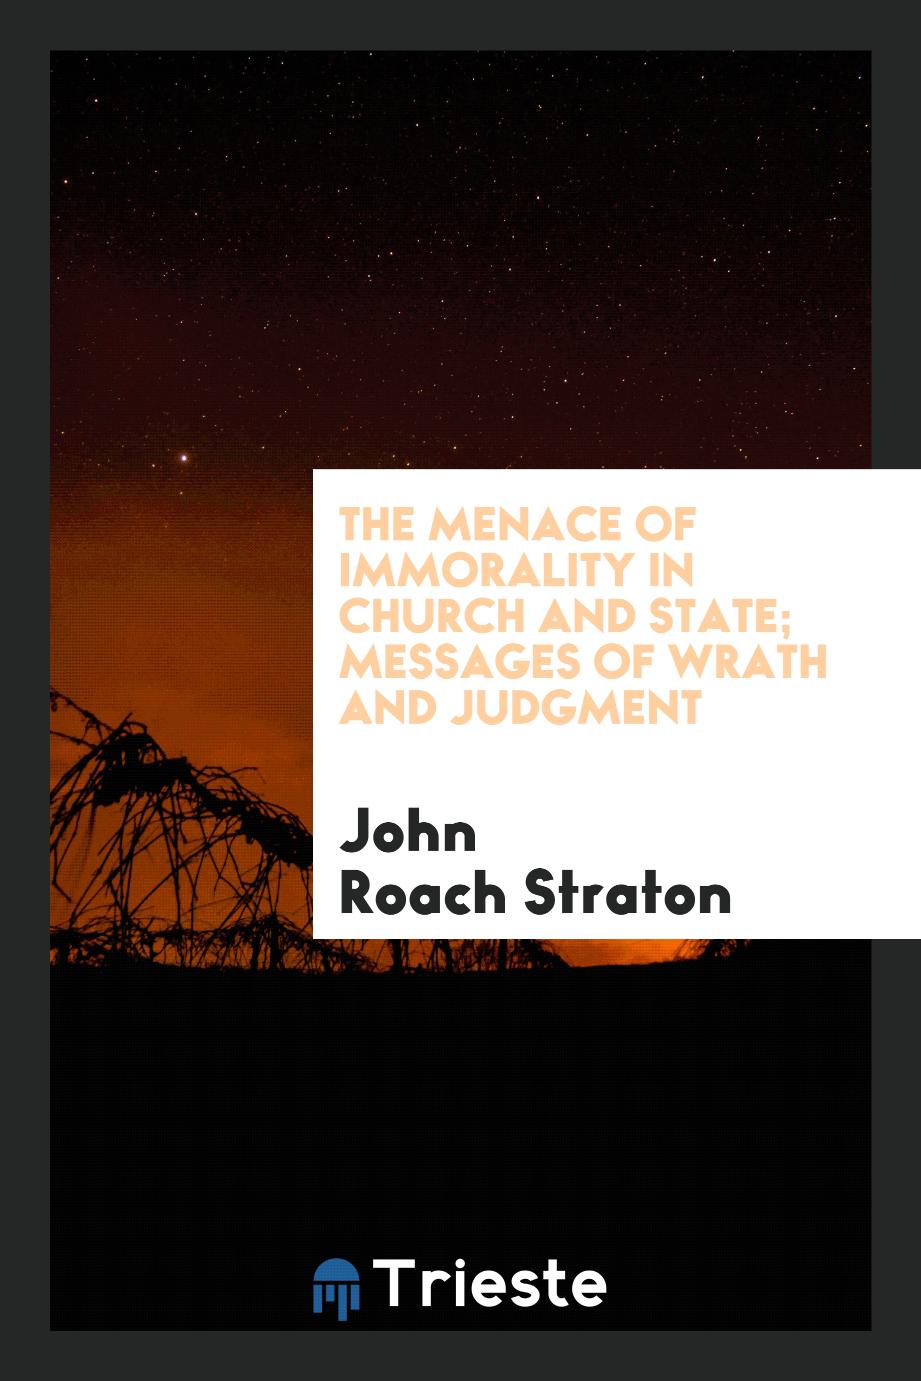 The menace of immorality in church and state; messages of wrath and judgment